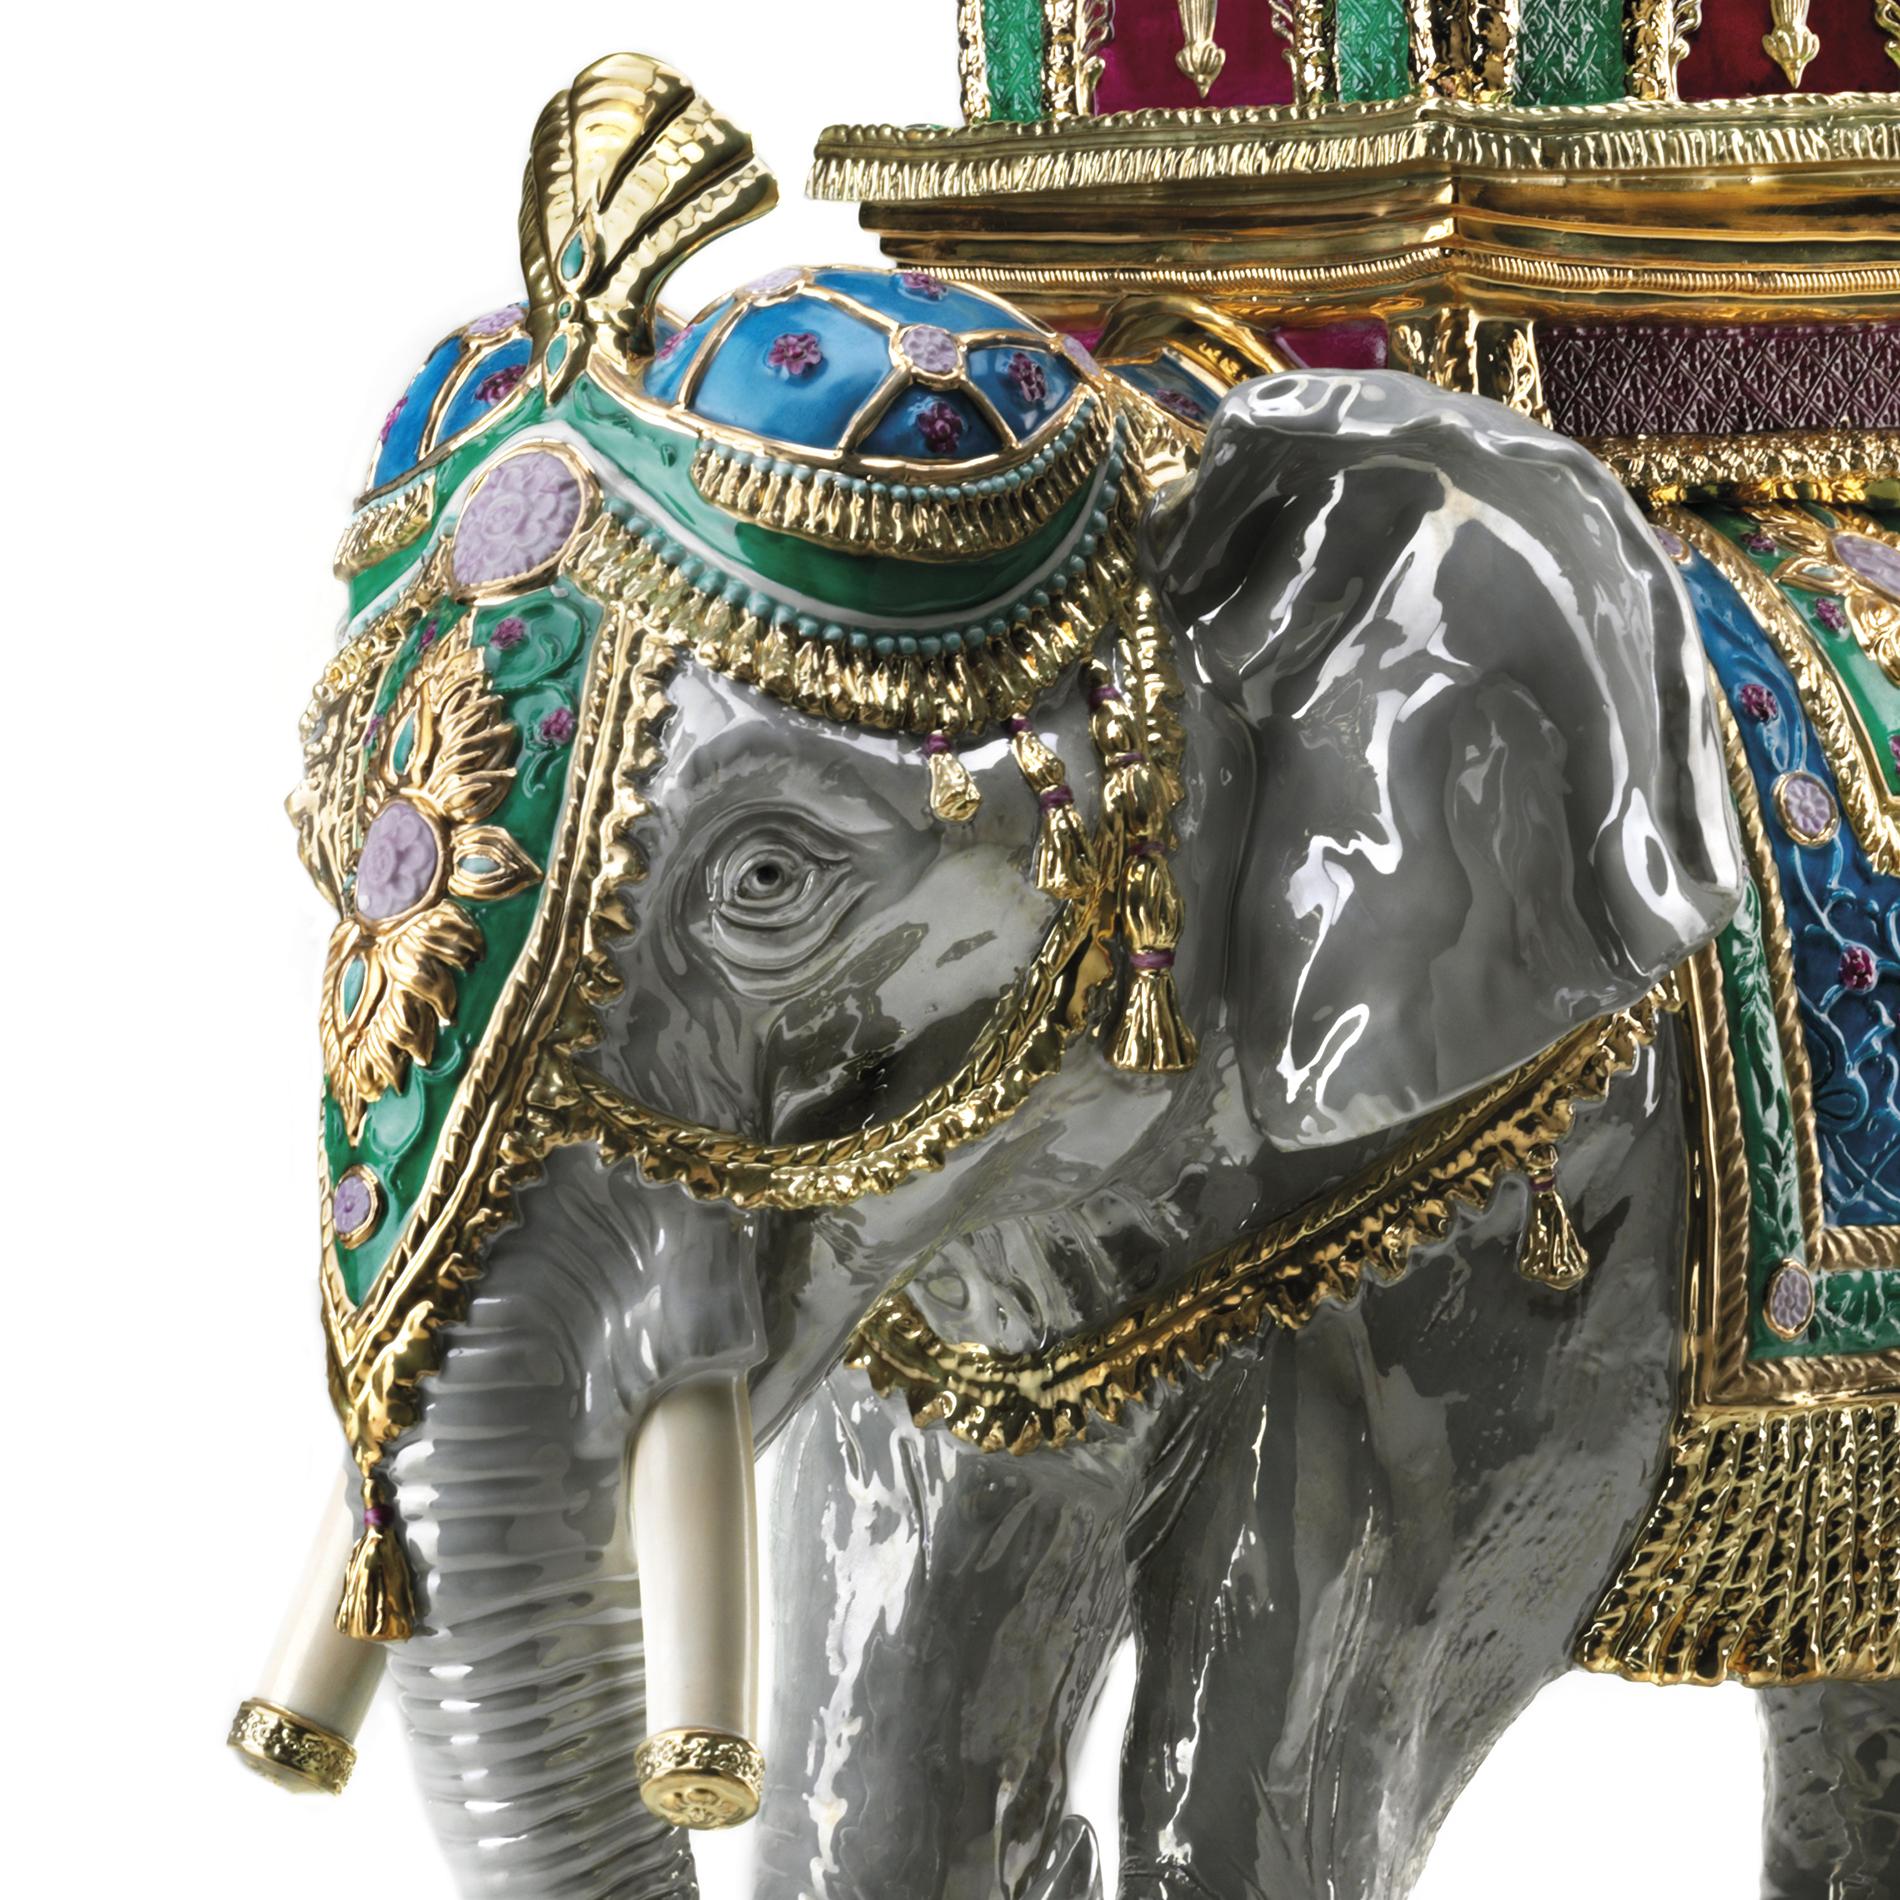 Sculpture Udaipur green elephant in handcrafted
porcelain, hand painted porcelain. With 24-karat gold
plated details.